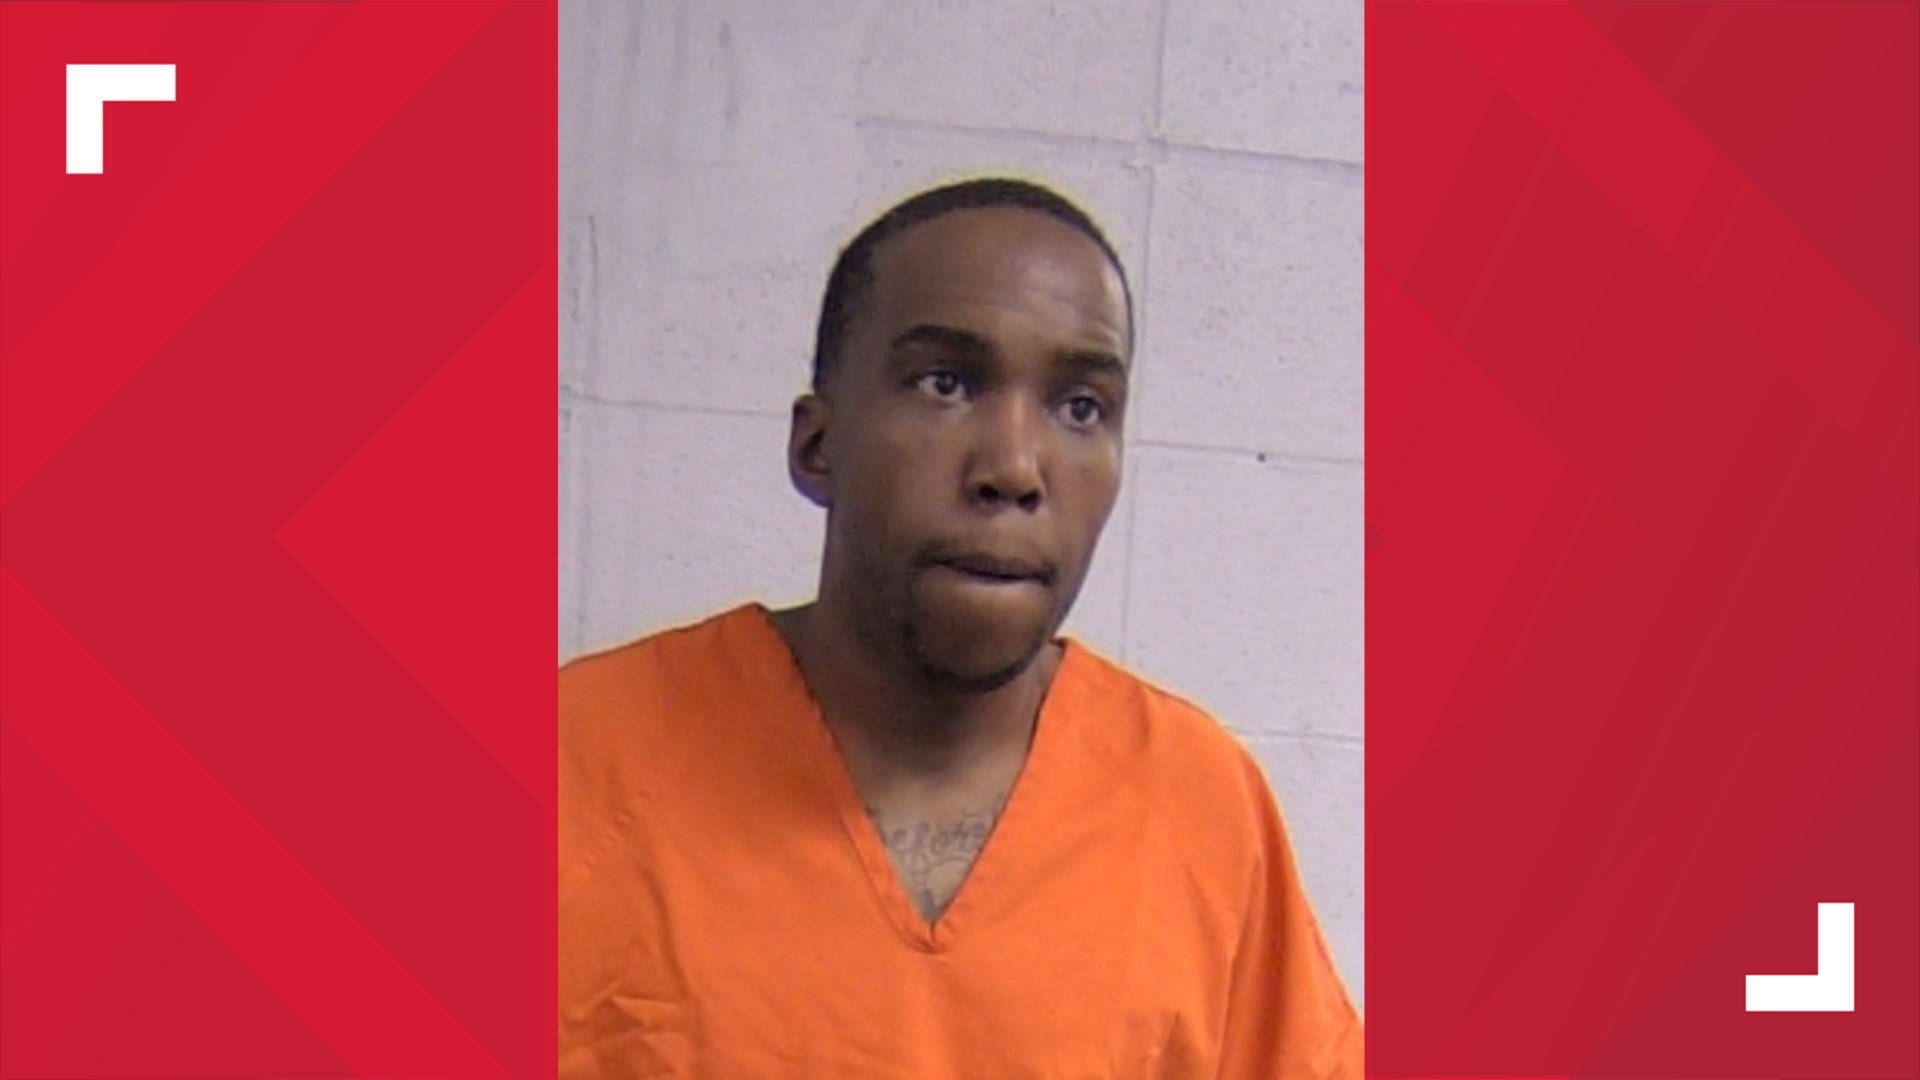 Glover is accused of using kids to help transport and sell heroin. His arrest stems from the death of a teen in April who police say died from fentanyl overdose.